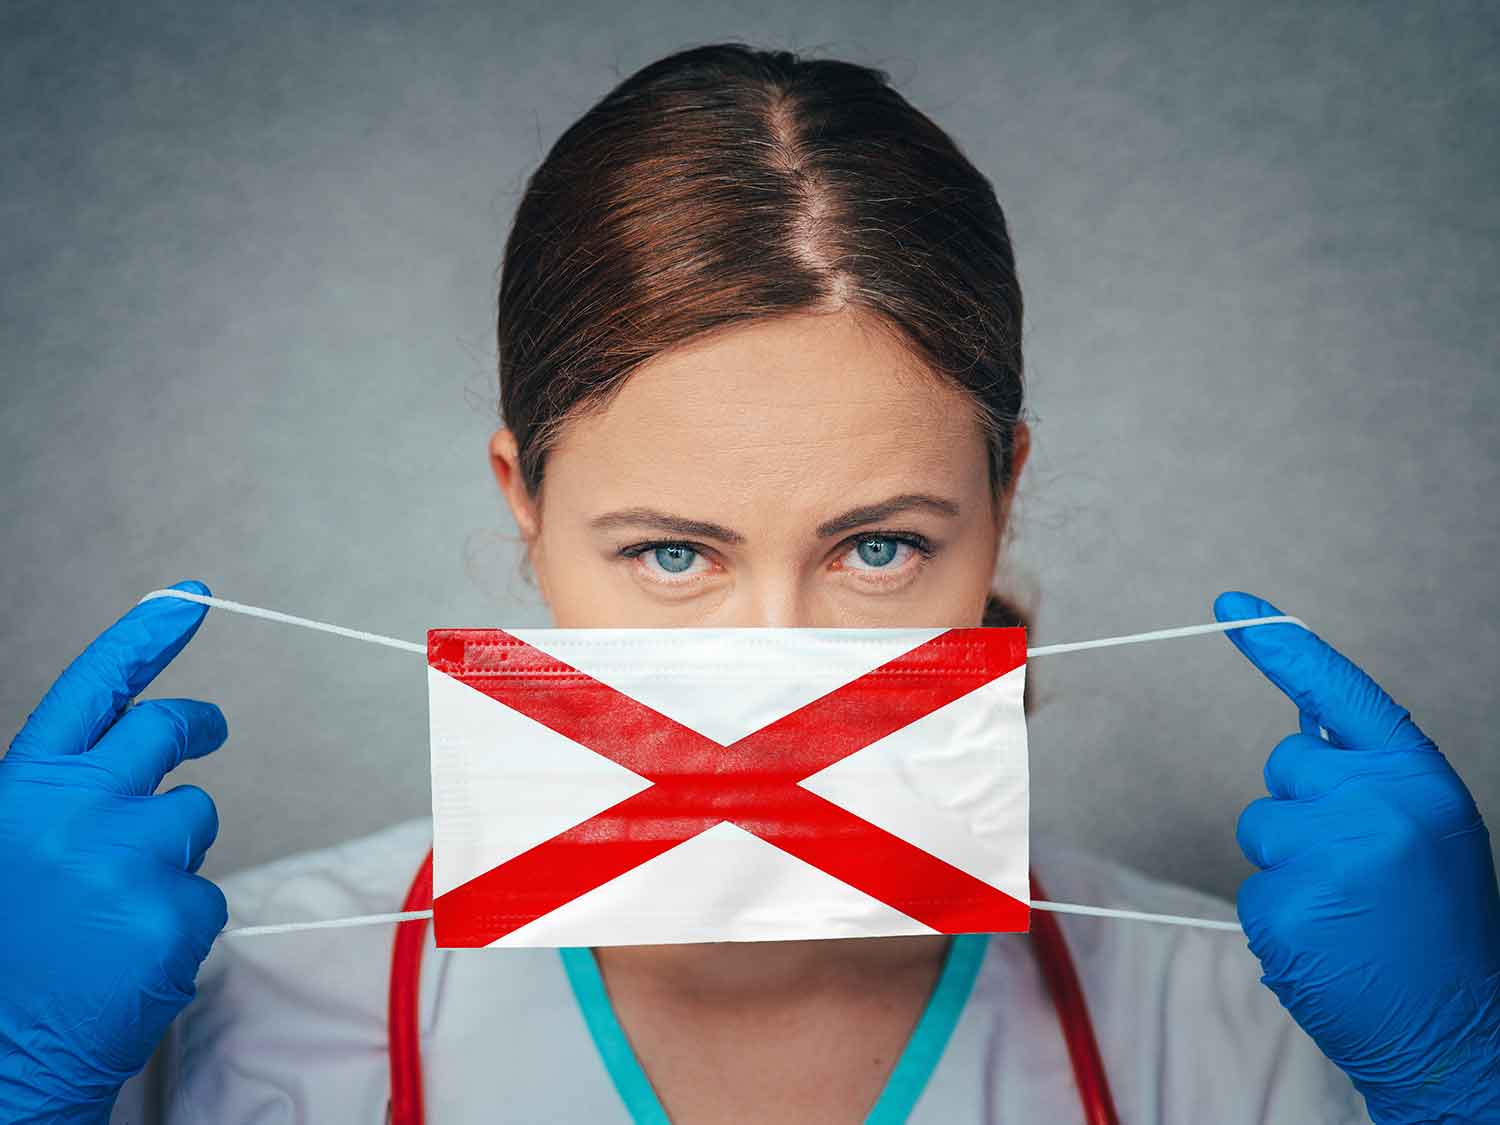 A Female Doctor With Medical Malpractice Insurance Putting On A Surgical Mask With The Alabama State Flag On It